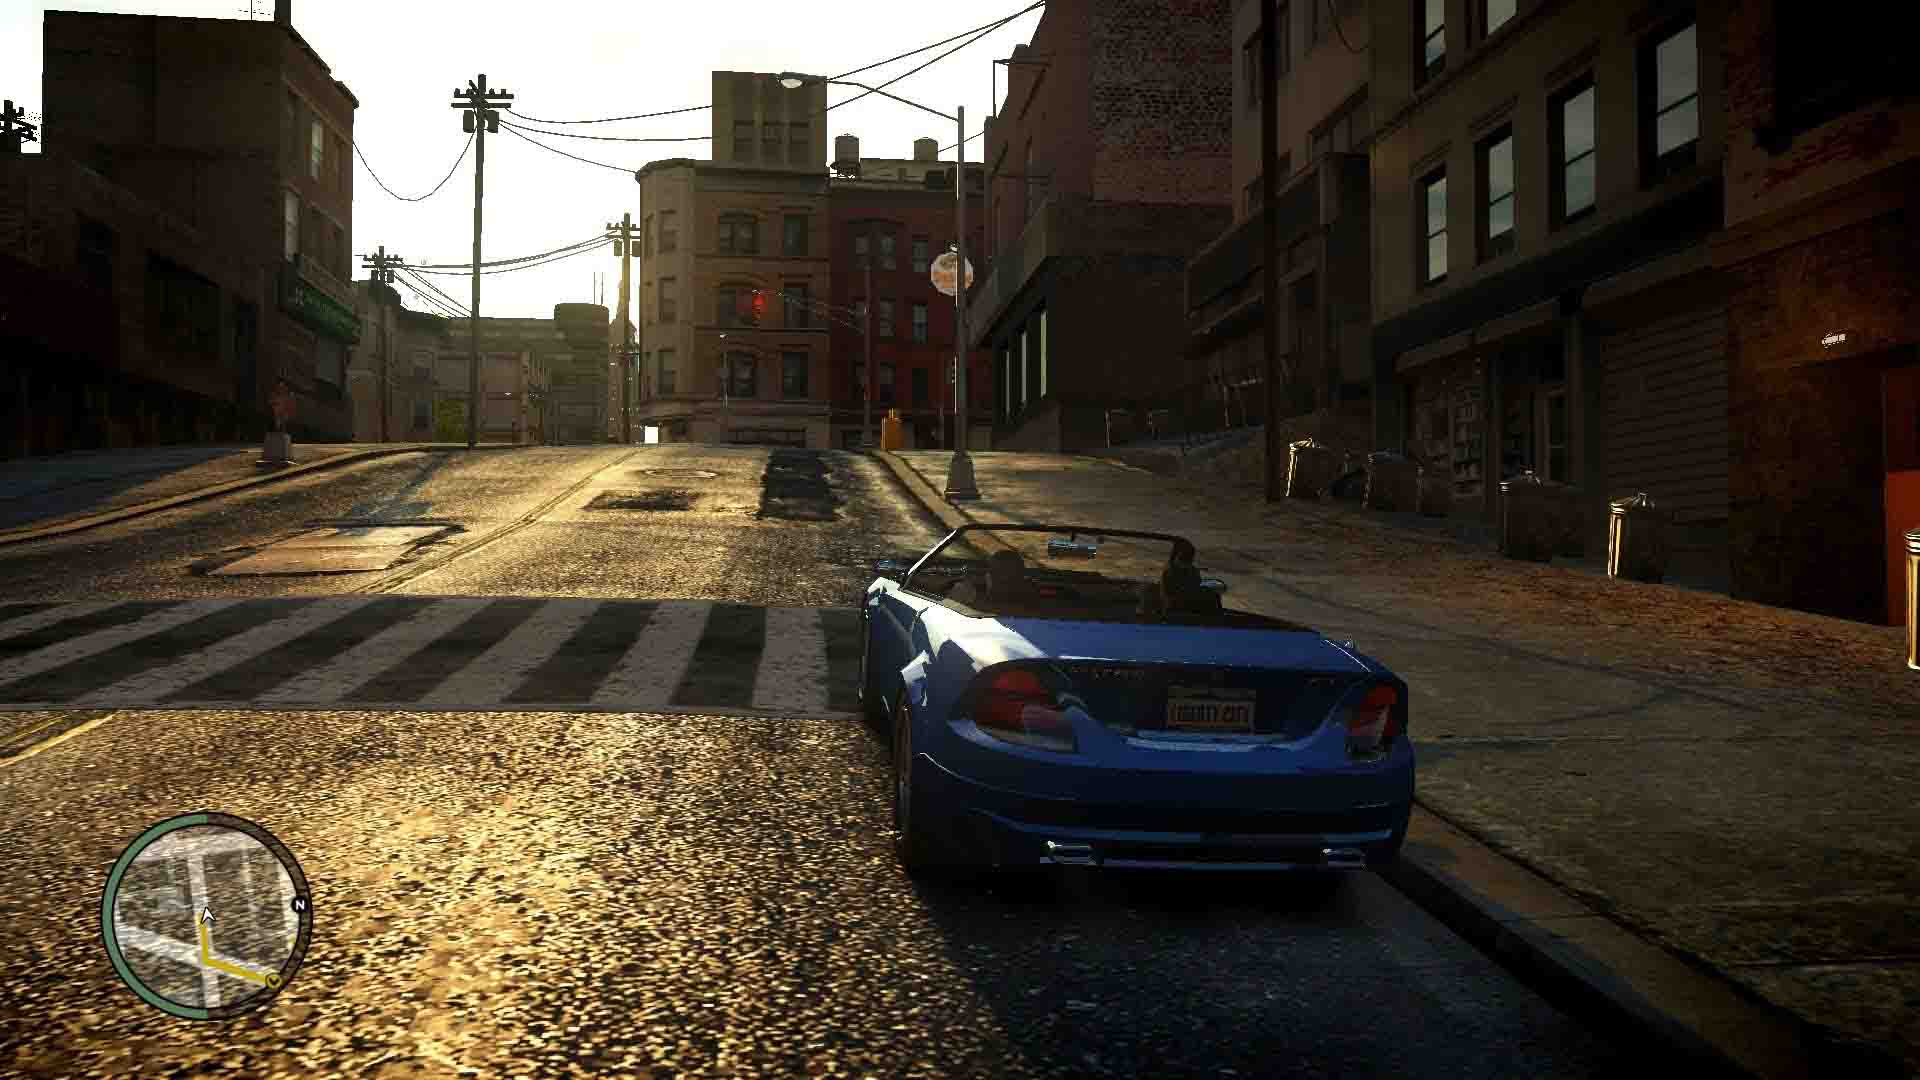 Ppsspp gta compressed 5 iso highly GTA 5